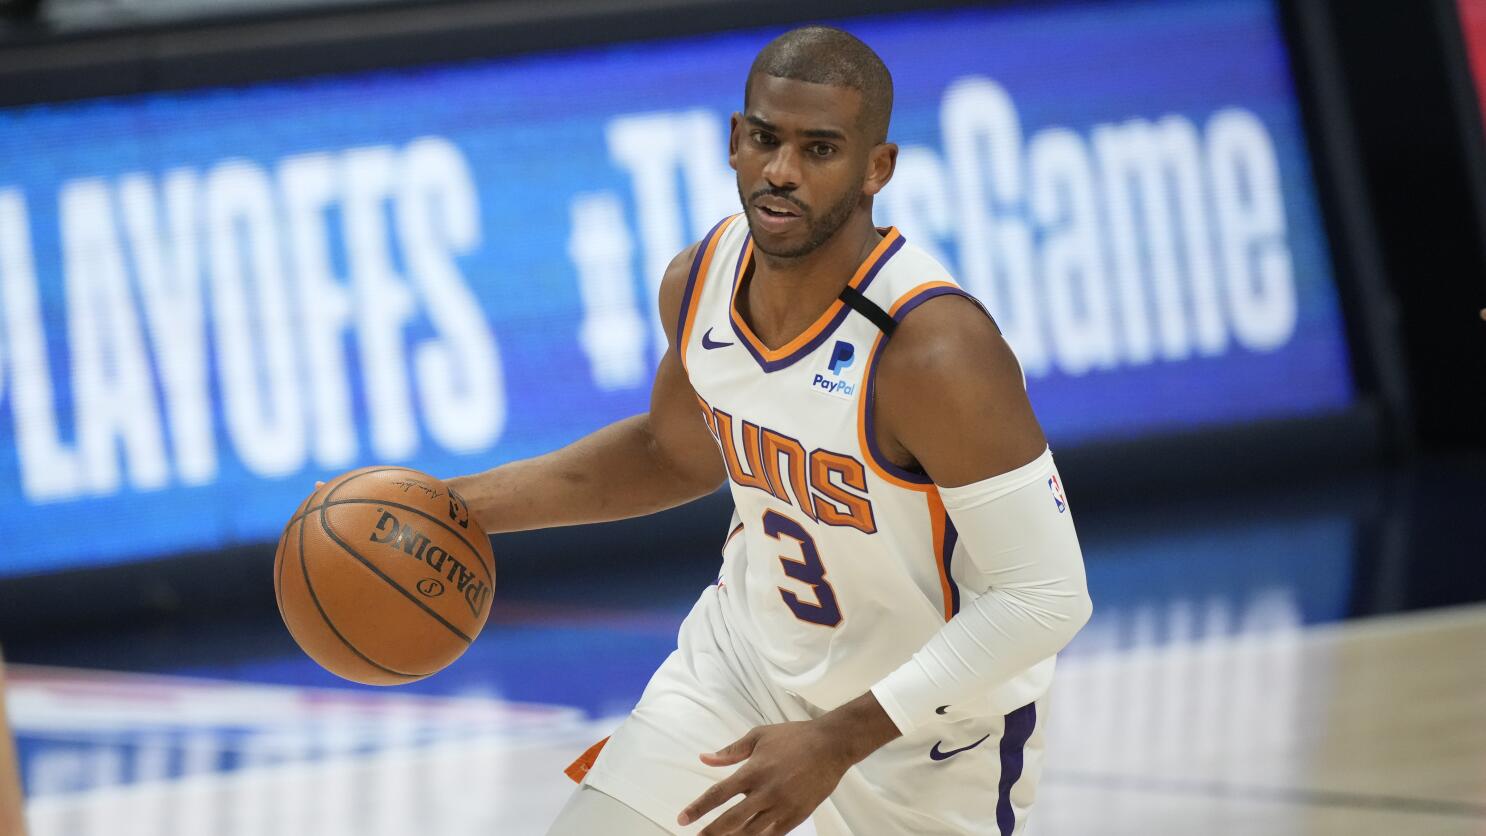 2018 NBA Playoffs: Chris Paul will miss Game 7 vs. Warriors due to